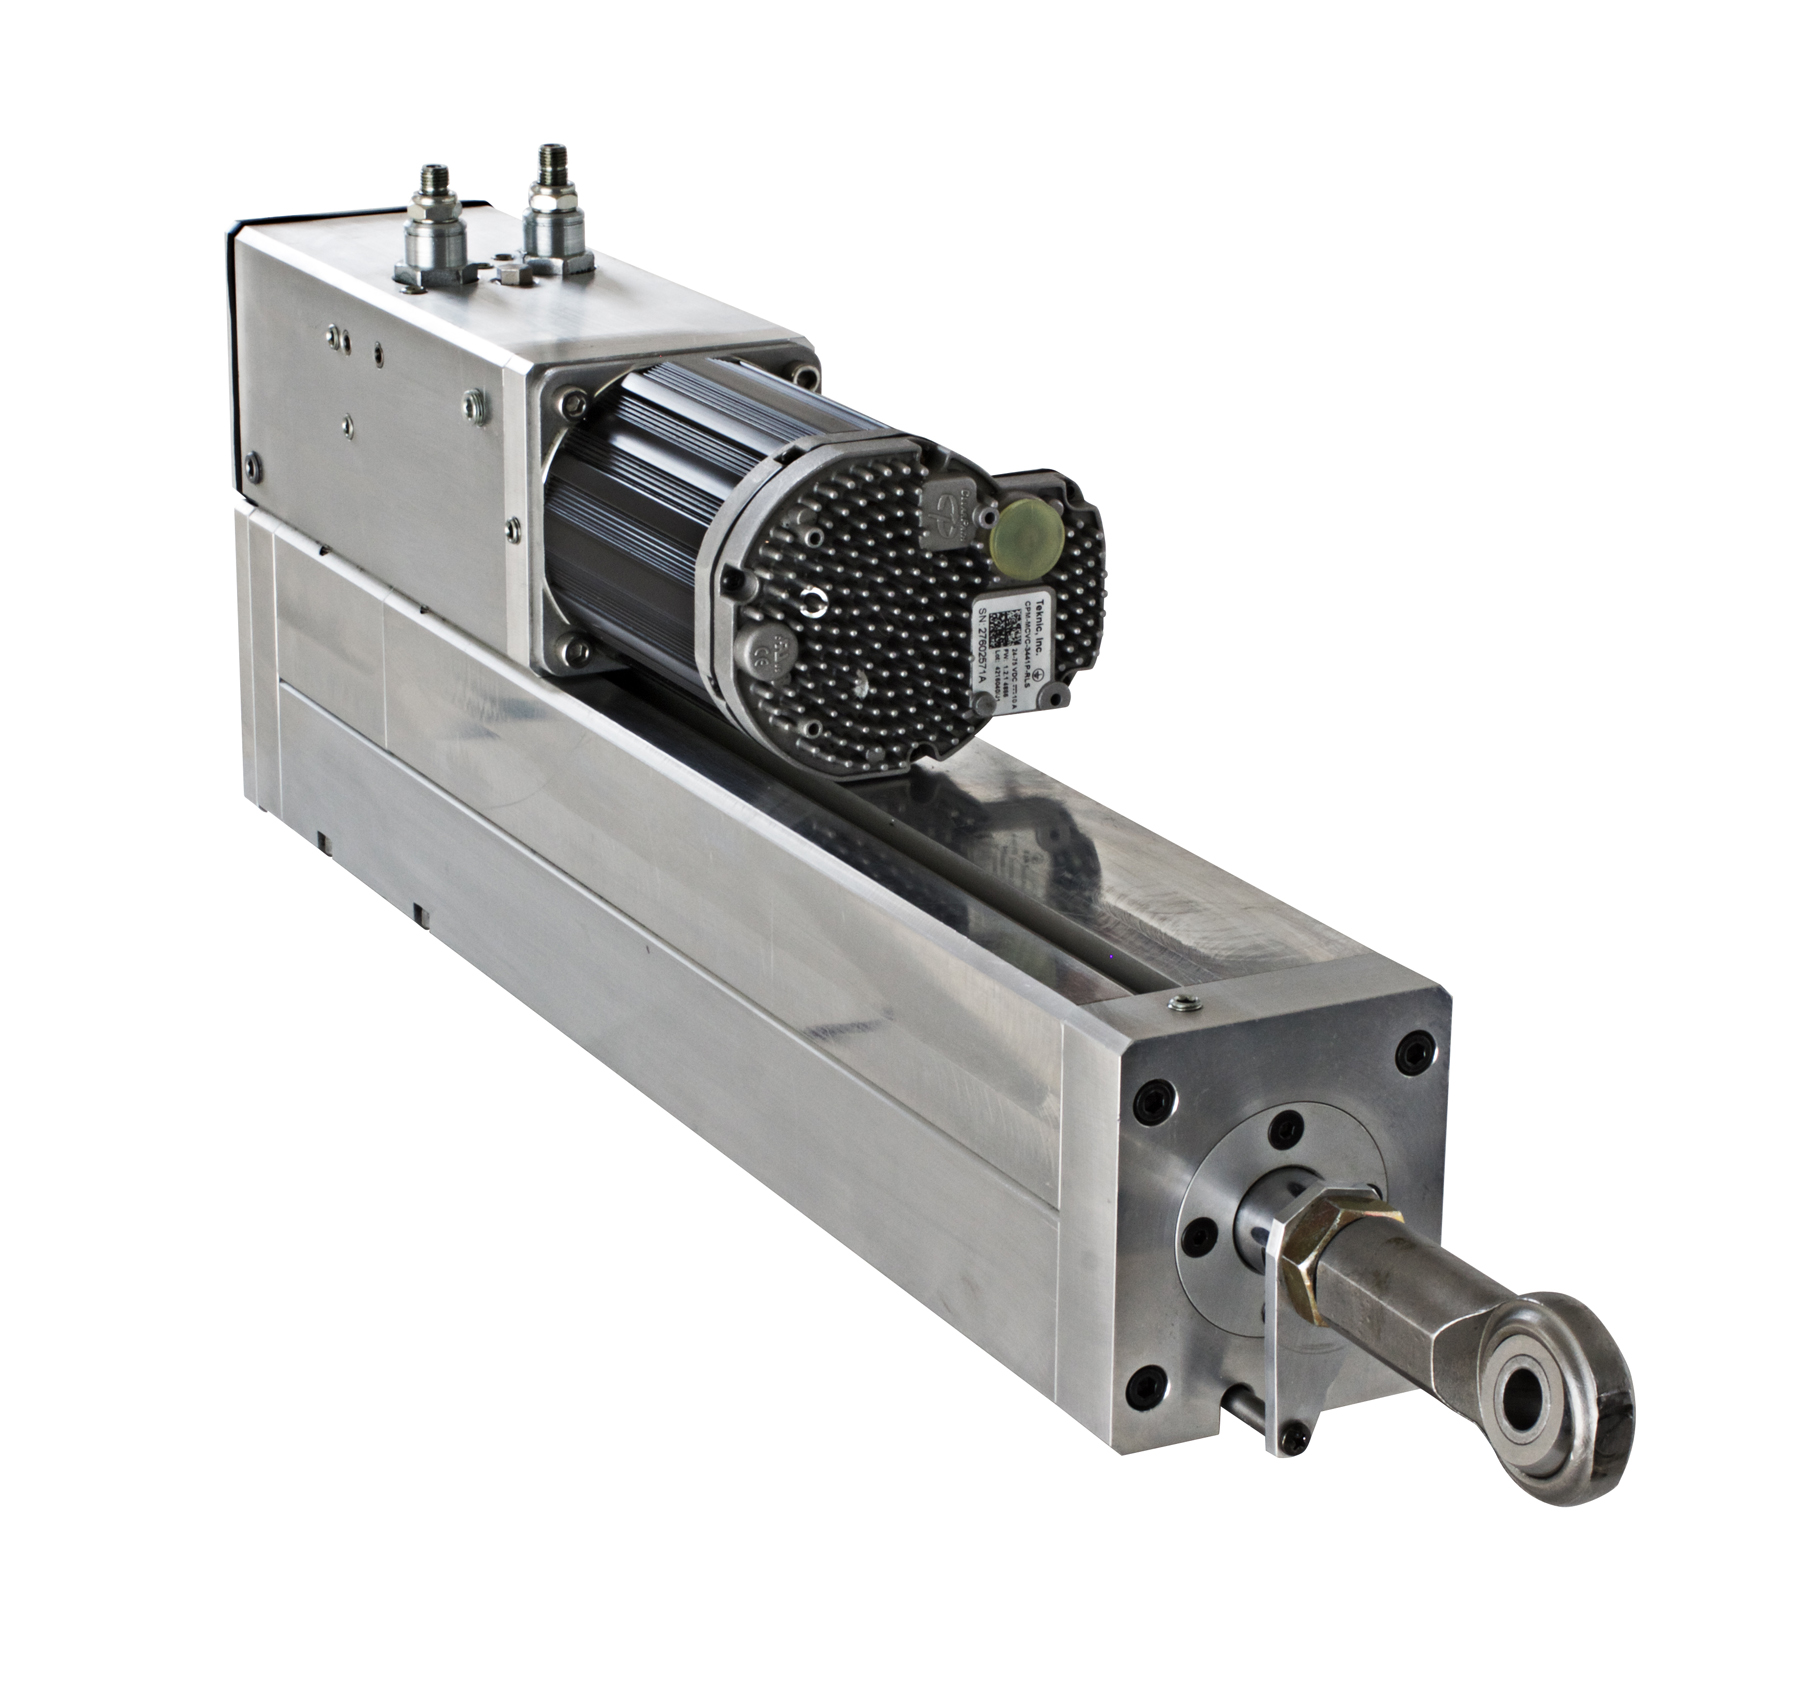 Kyntrol's new stand-alone Electro-Hydraulic Actuator Technology accurately moves forces up to 20,000 pounds (90kN) within a compact space envelope